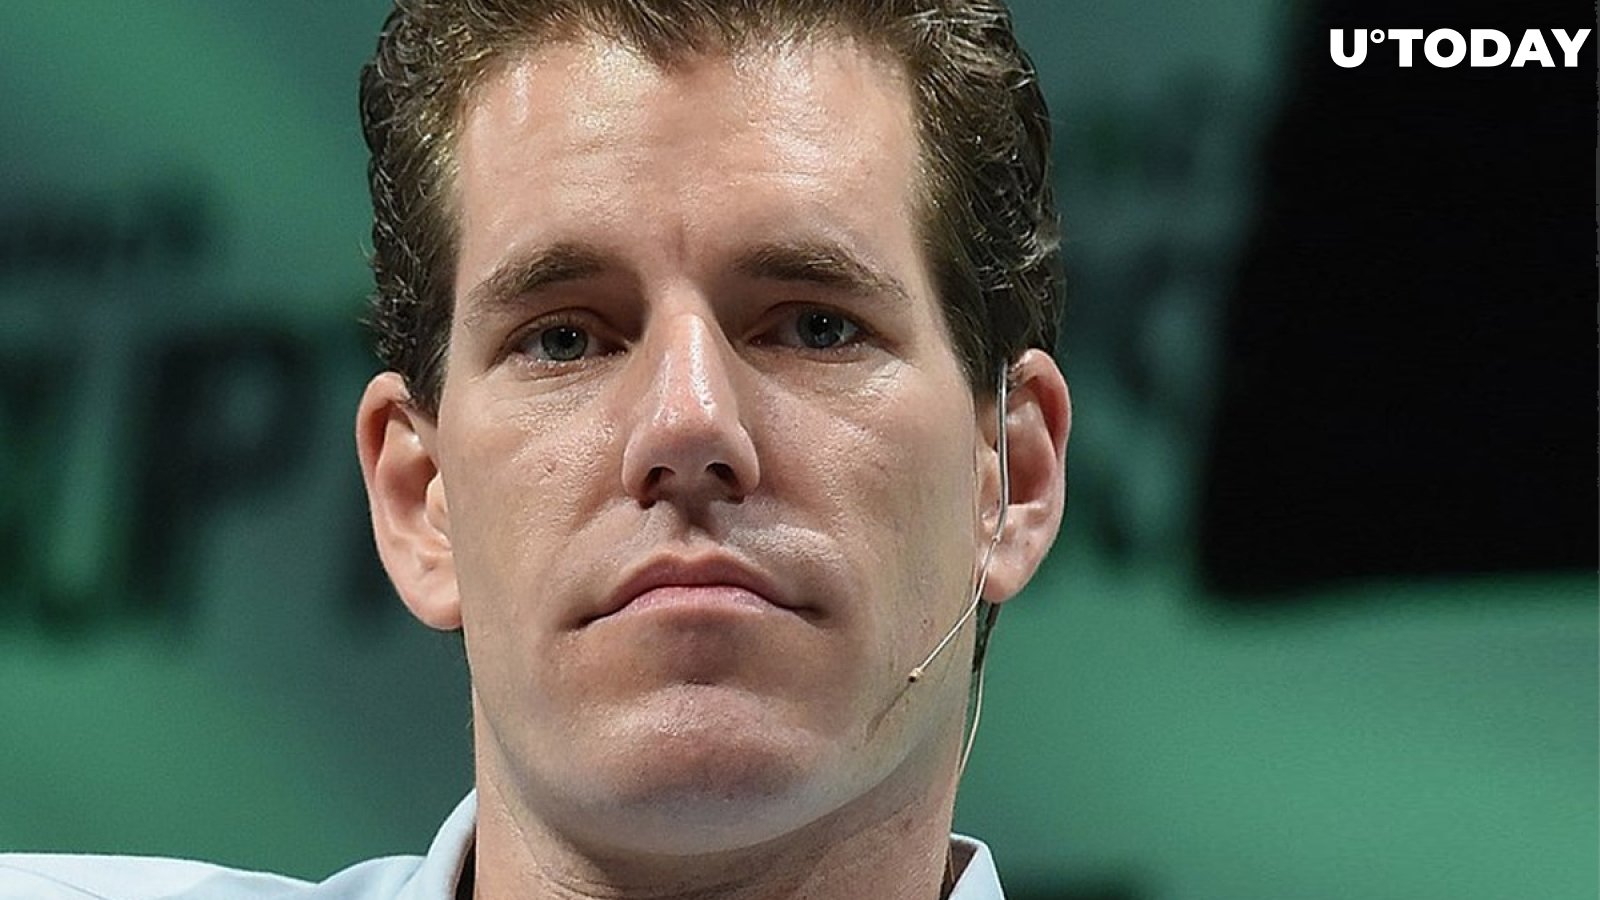 Here's What Will Support ETH's Value in the Future, Cameron Winklevoss States